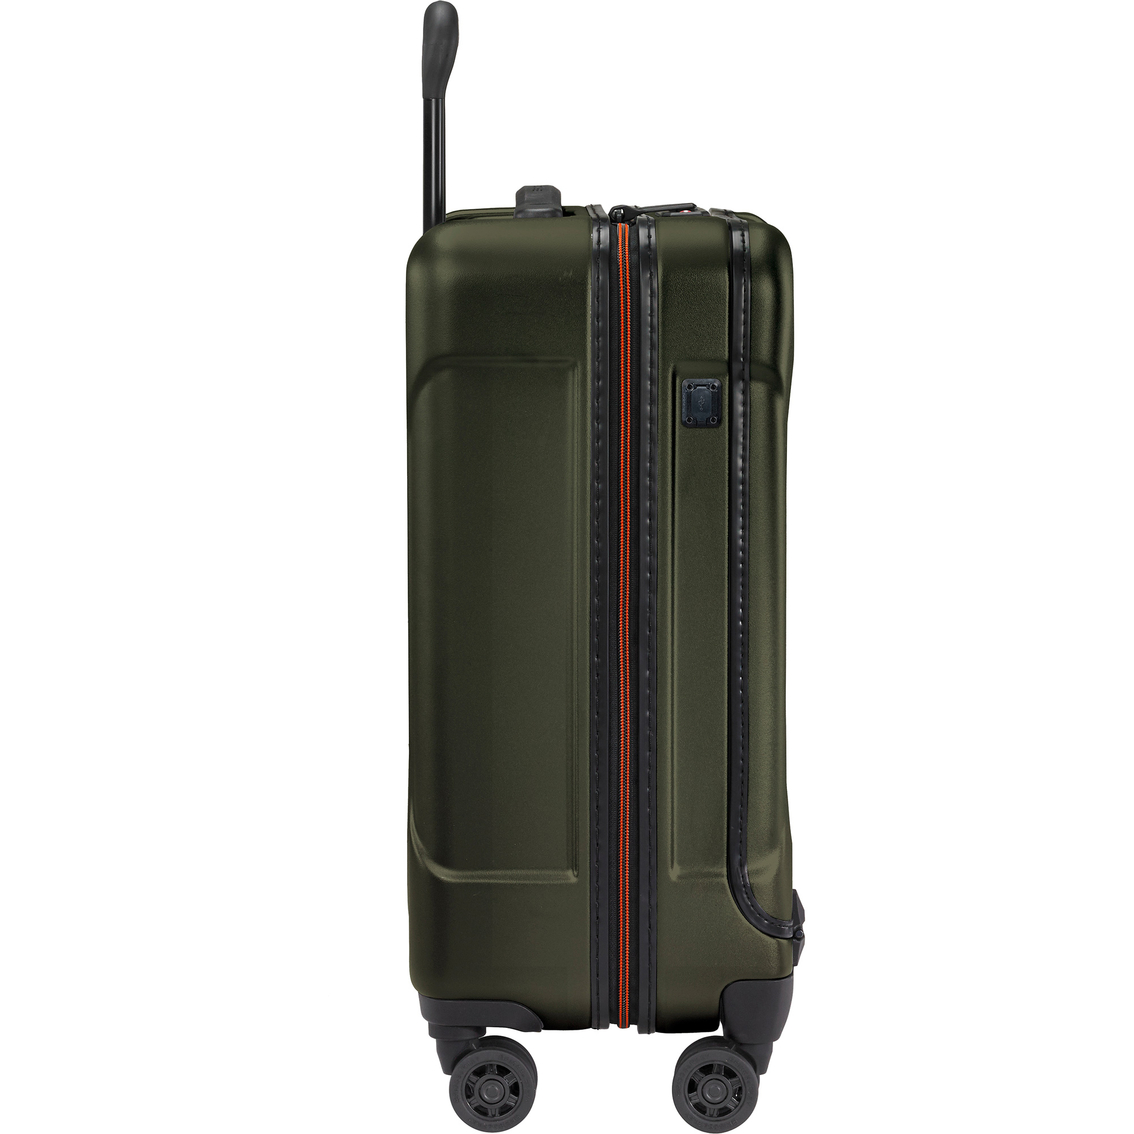 Briggs & Riley Torq 21 in. International Carry-On Spinner - Image 4 of 10